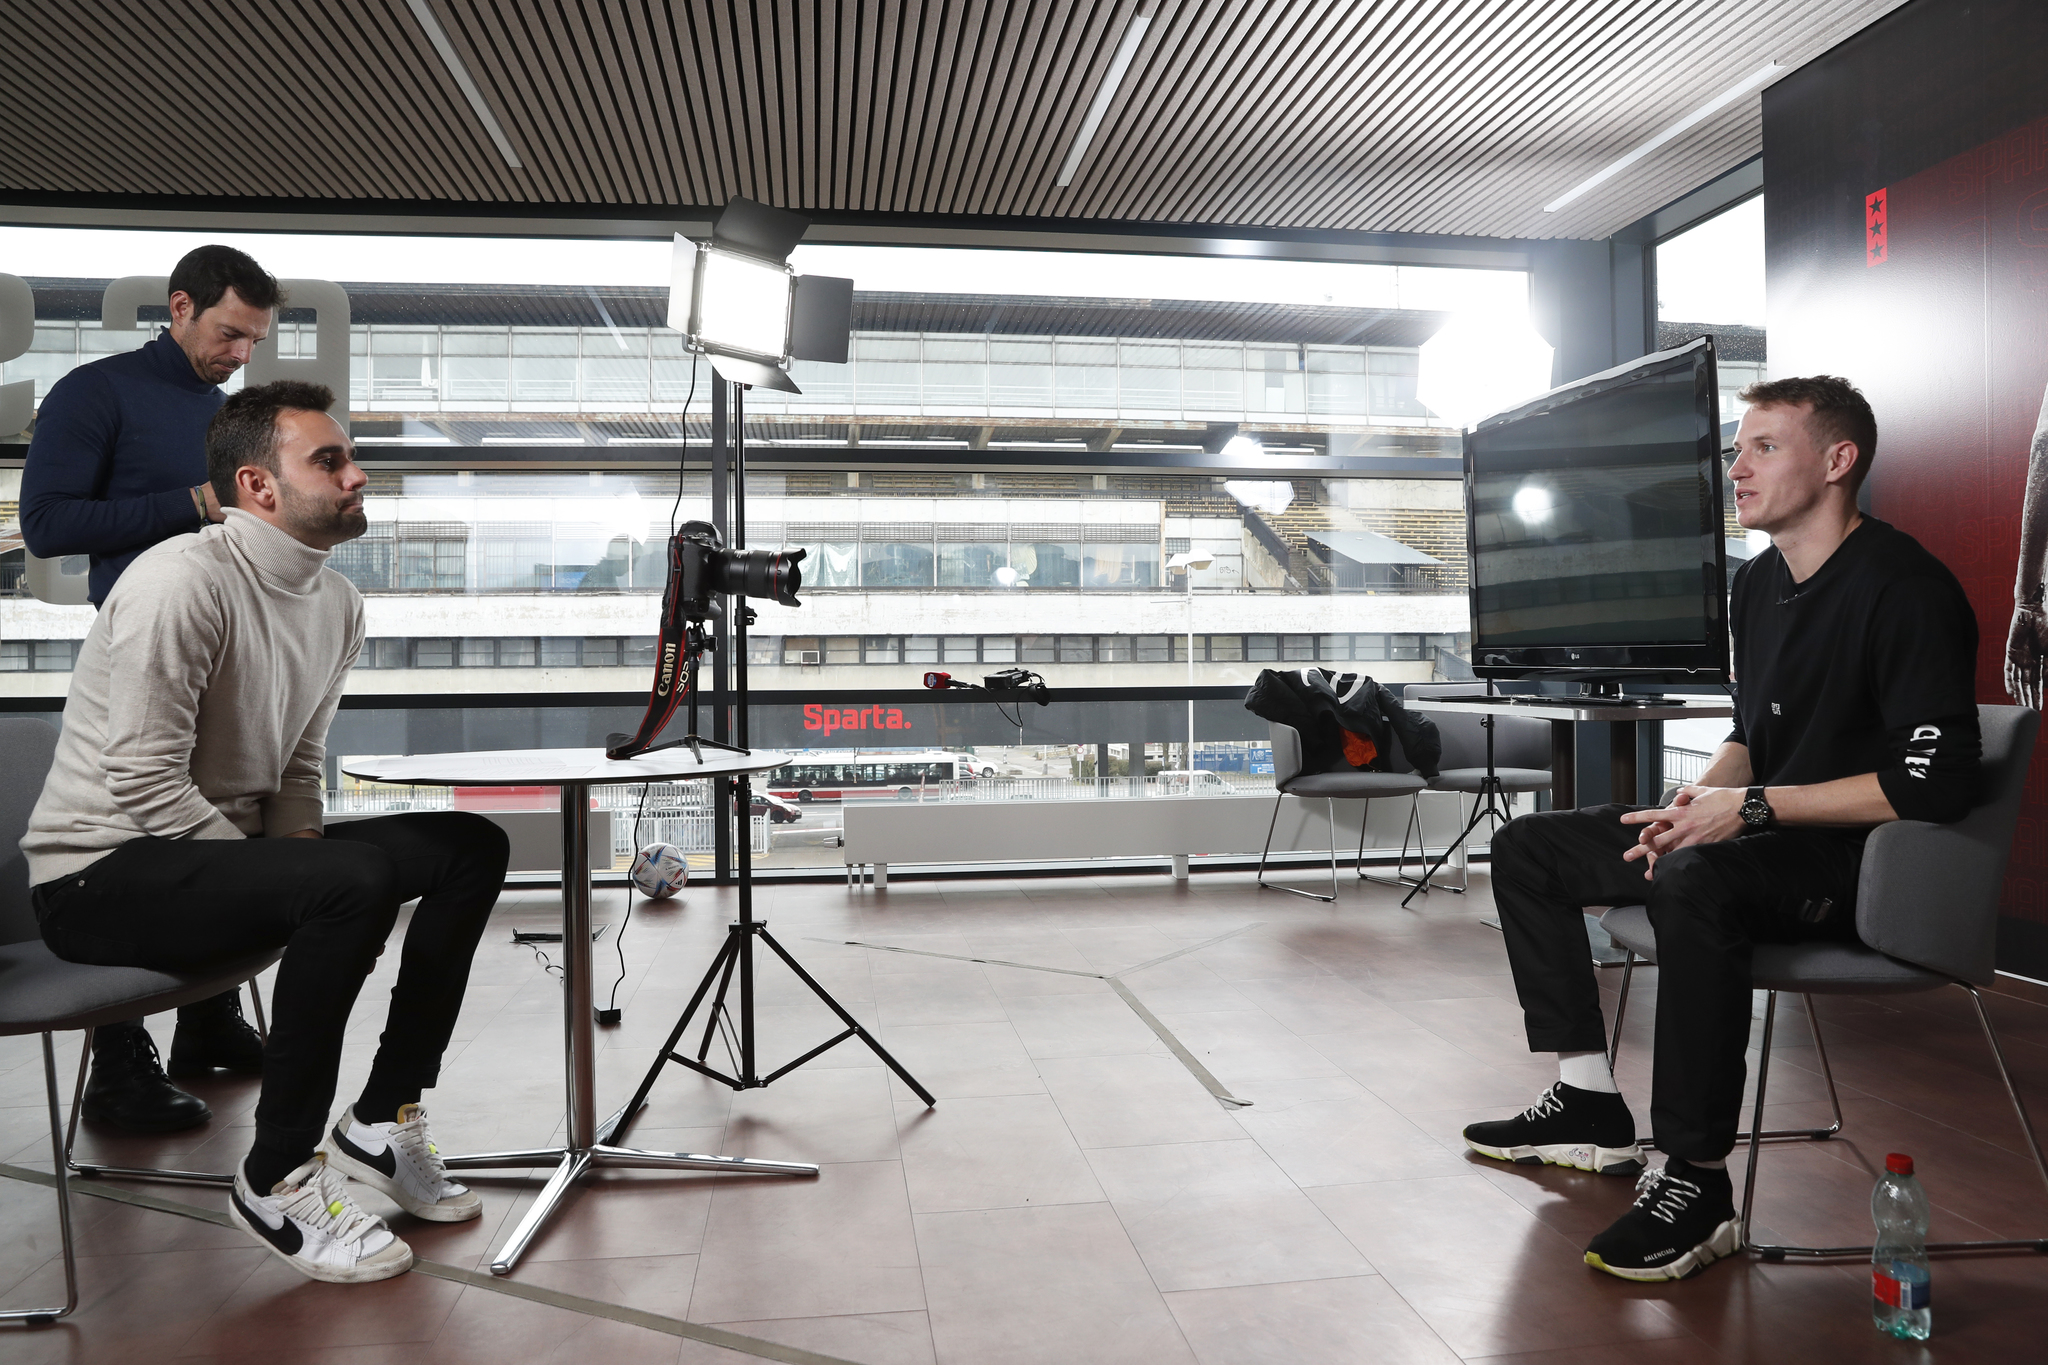 Jantko during the interview in Prague with MARCA journalists.